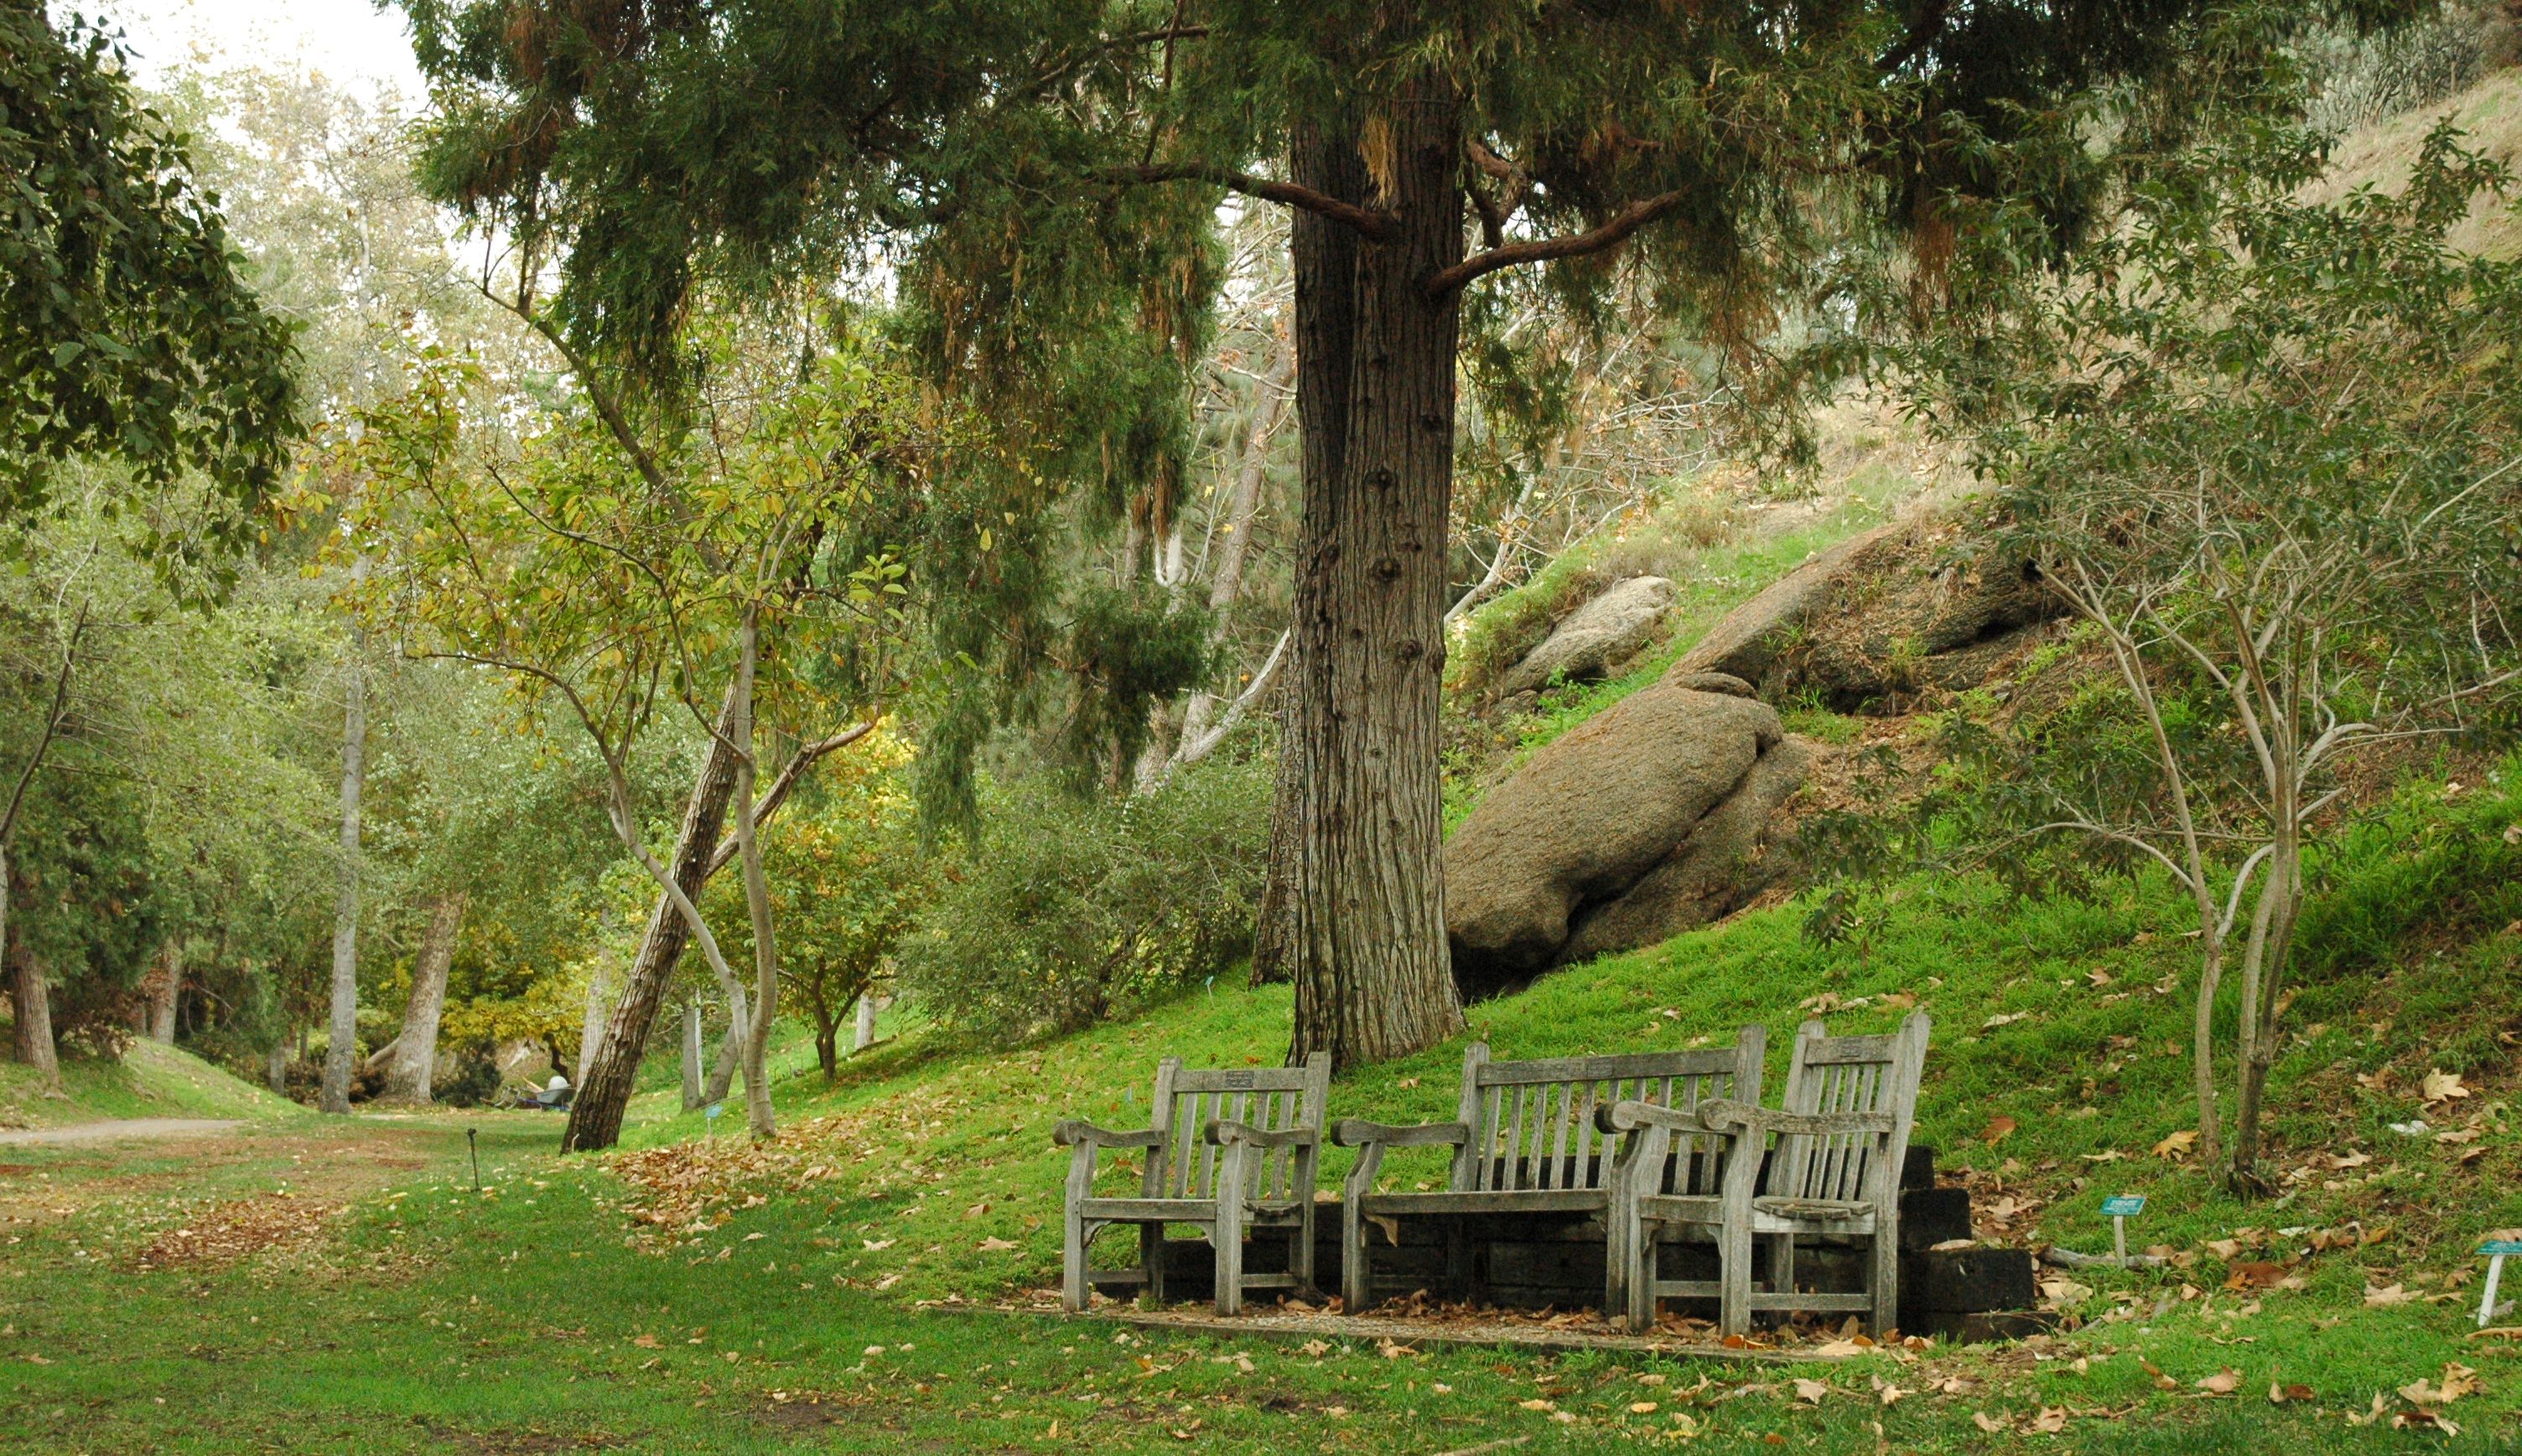 Serene scene of bench and chairs under a tree at the Botanical Gardens.